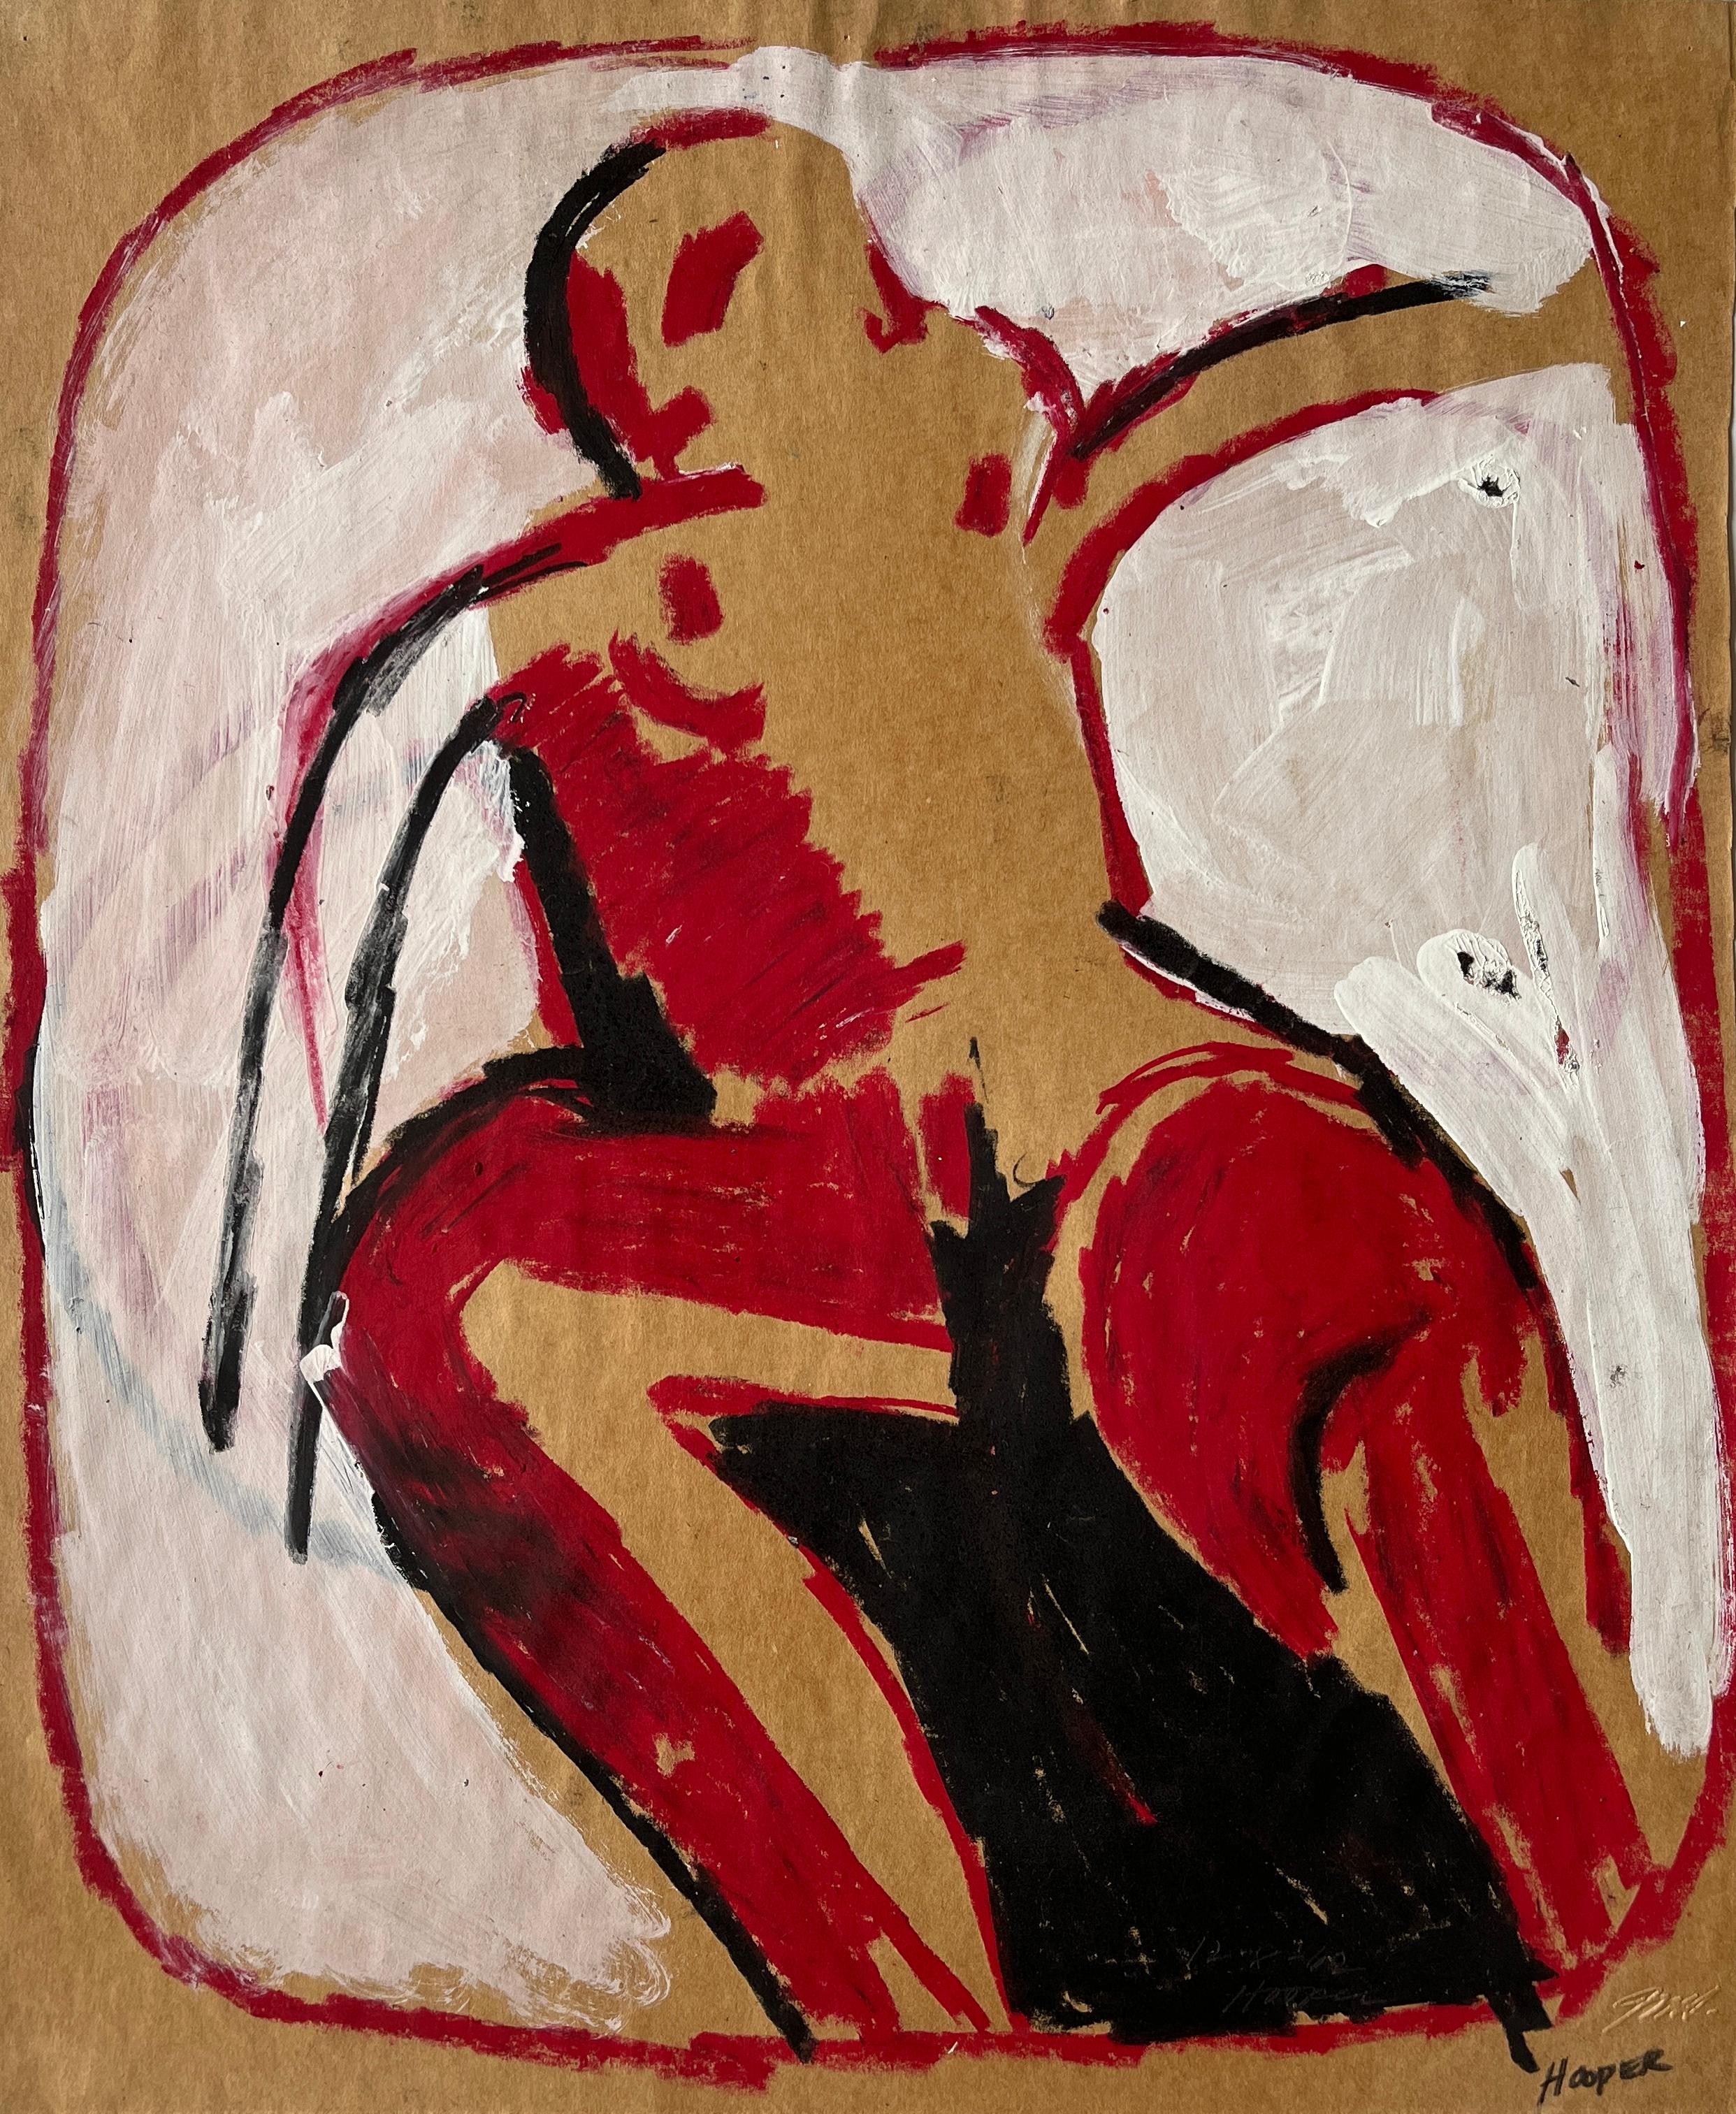 Jack Hooper
"Nude in Bubble"
c. 1960
Gouache and pastel on paper
15"x18" unframed
Signed in pencil lower left

Jack Hooper's abstract artwork, featuring a figure outlined in bold black with dynamic splashes of red on a white background, is a